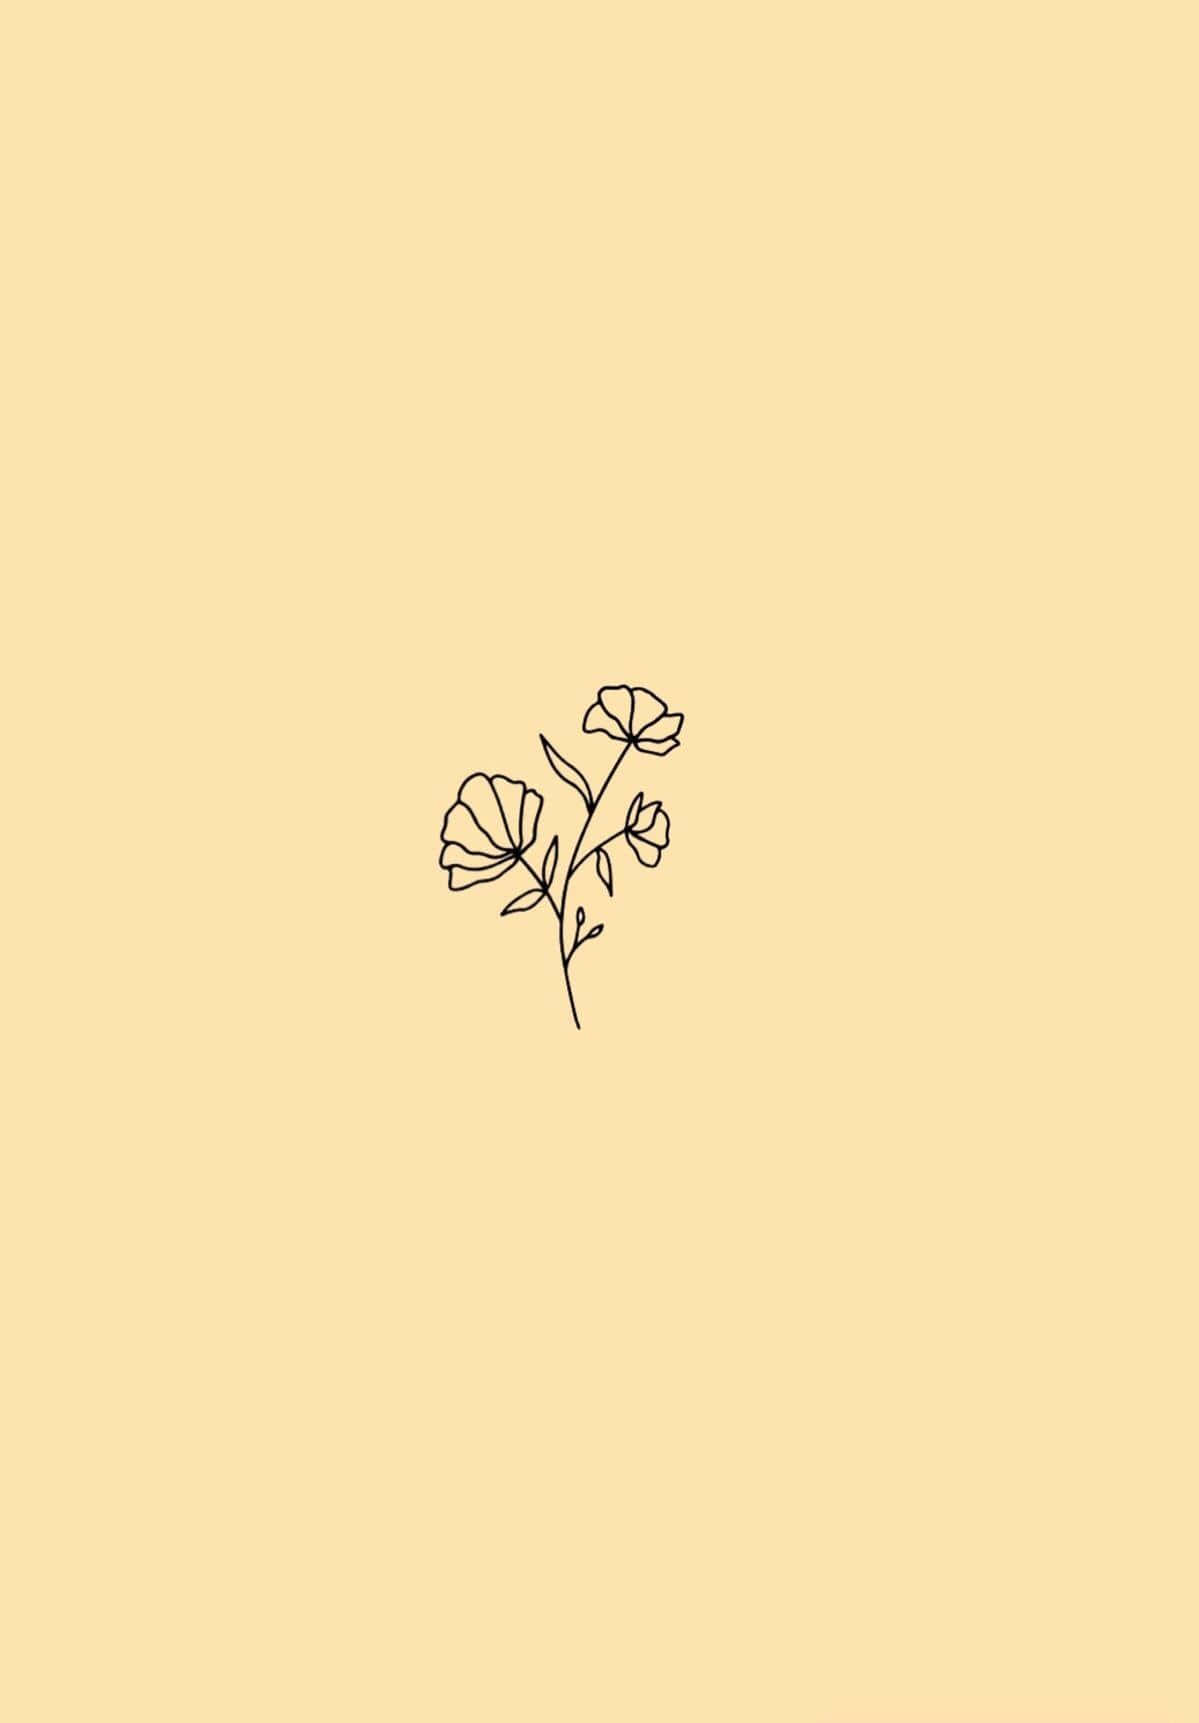 A Simple Drawing Of A Flower On A Yellow Background Wallpaper